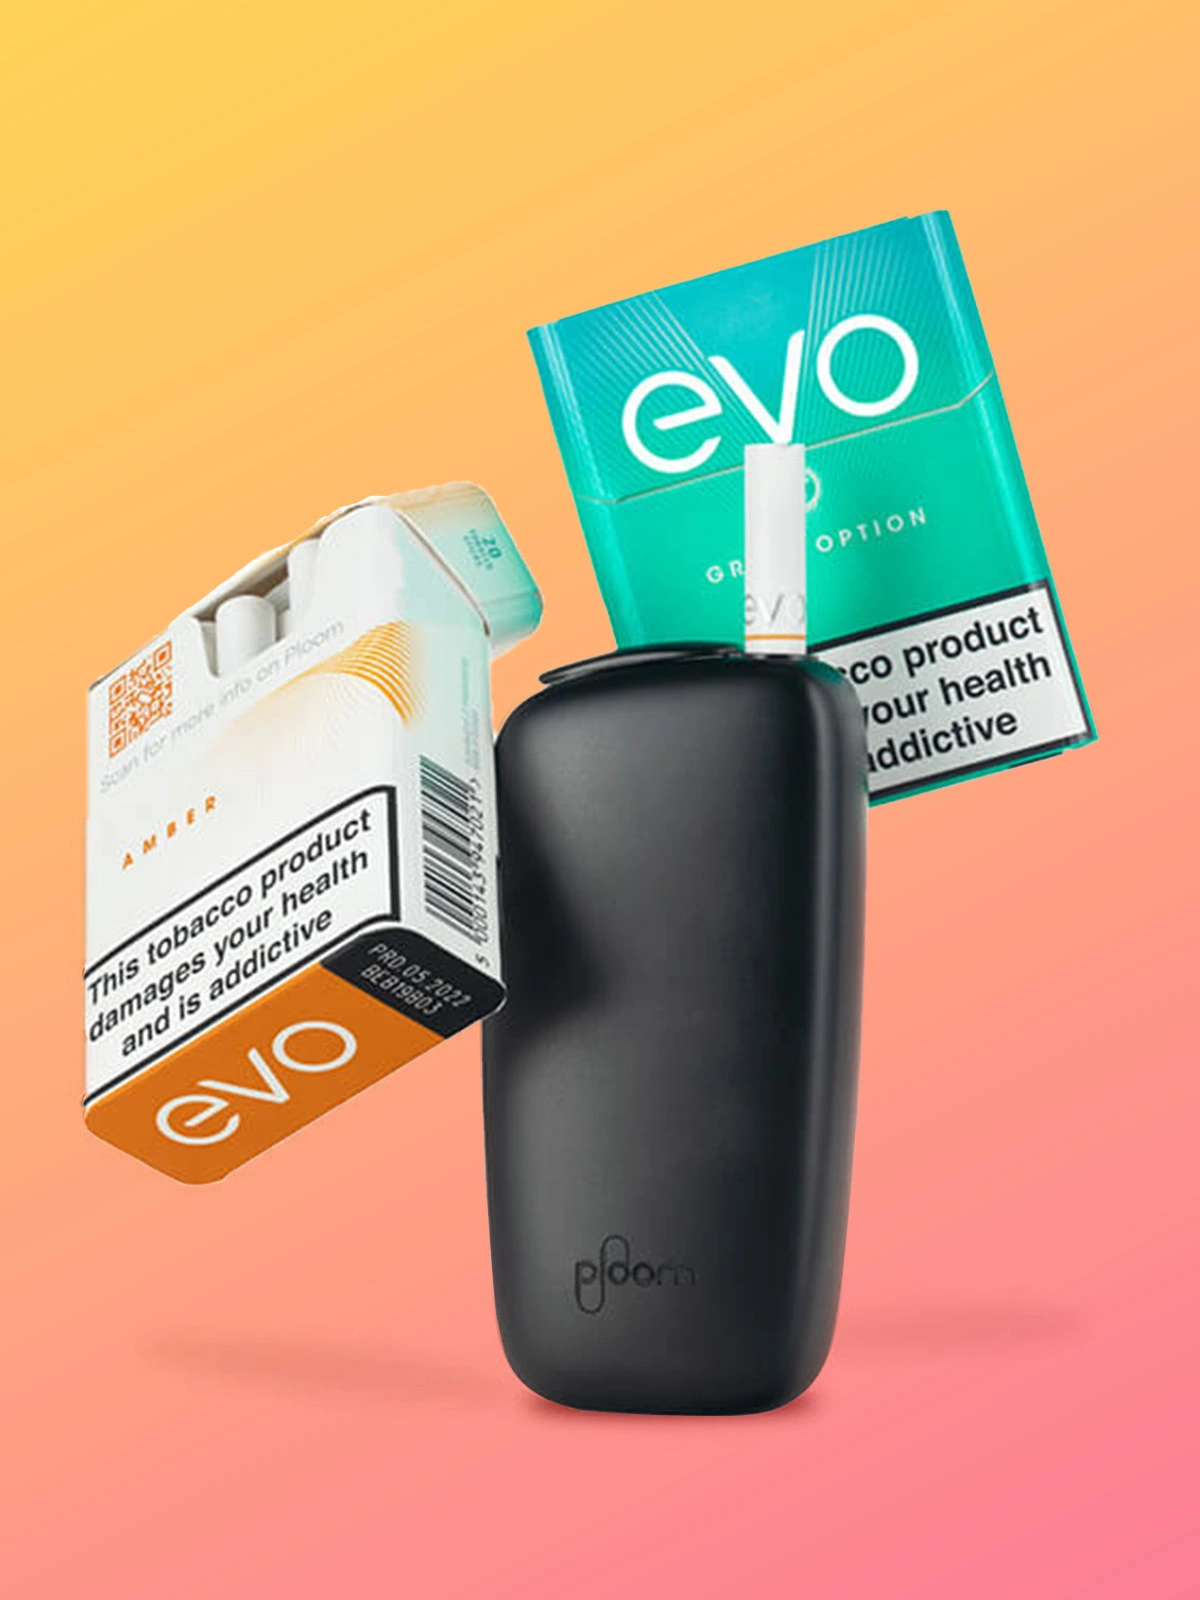 A Ploom X device along with floating boxes of EVO sticks in front of a peach and pink coloured background